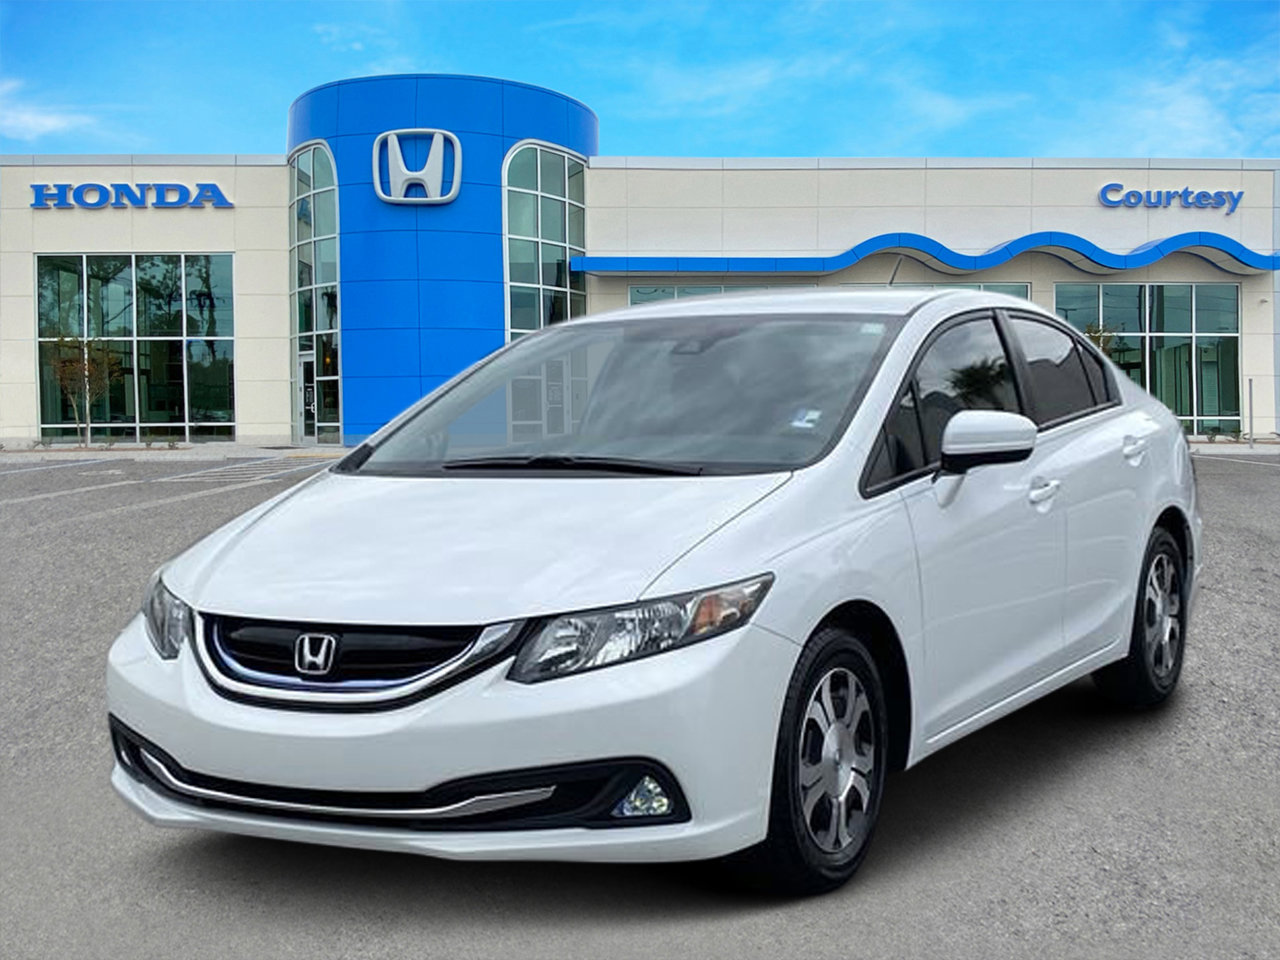 Used 2014 Honda Civic Hybrid for Sale Right Now - Autotrader